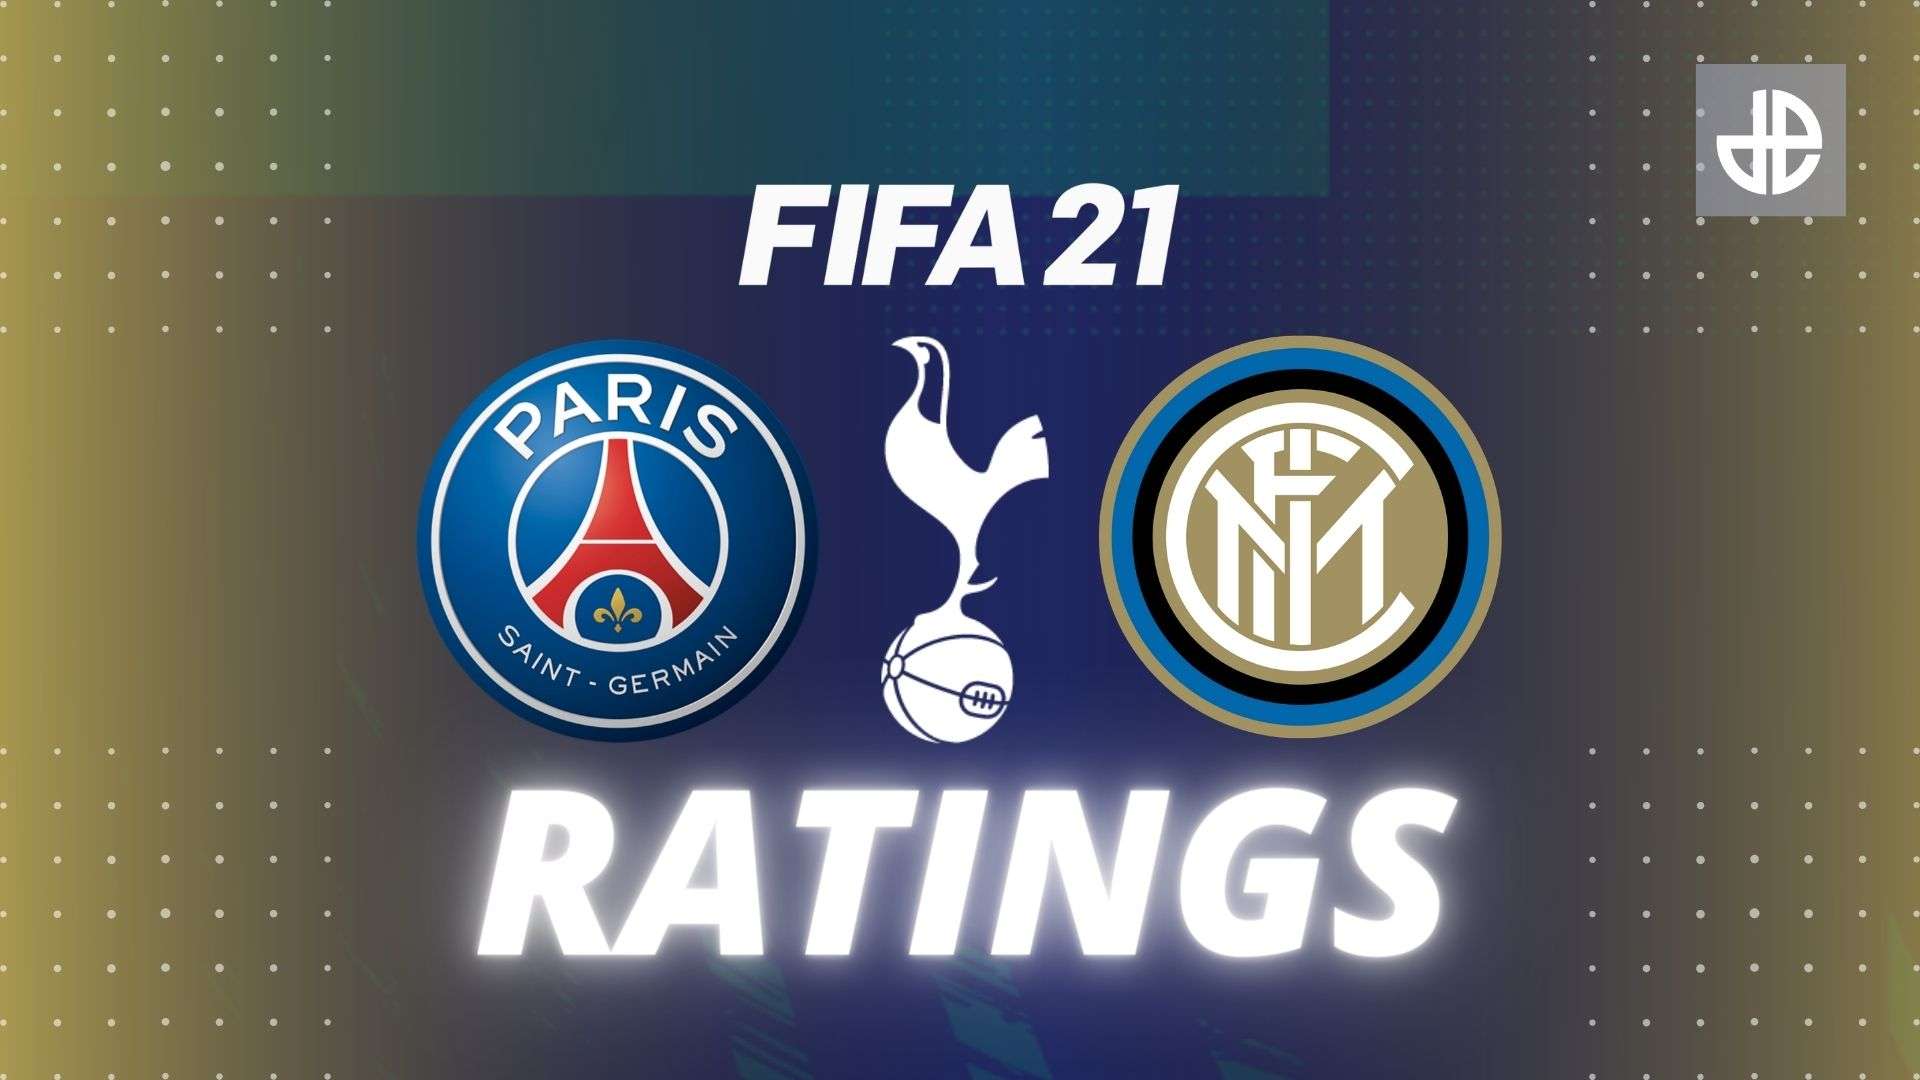 FIFA 21 ratings image for Spurs, PSG and Inter Milan